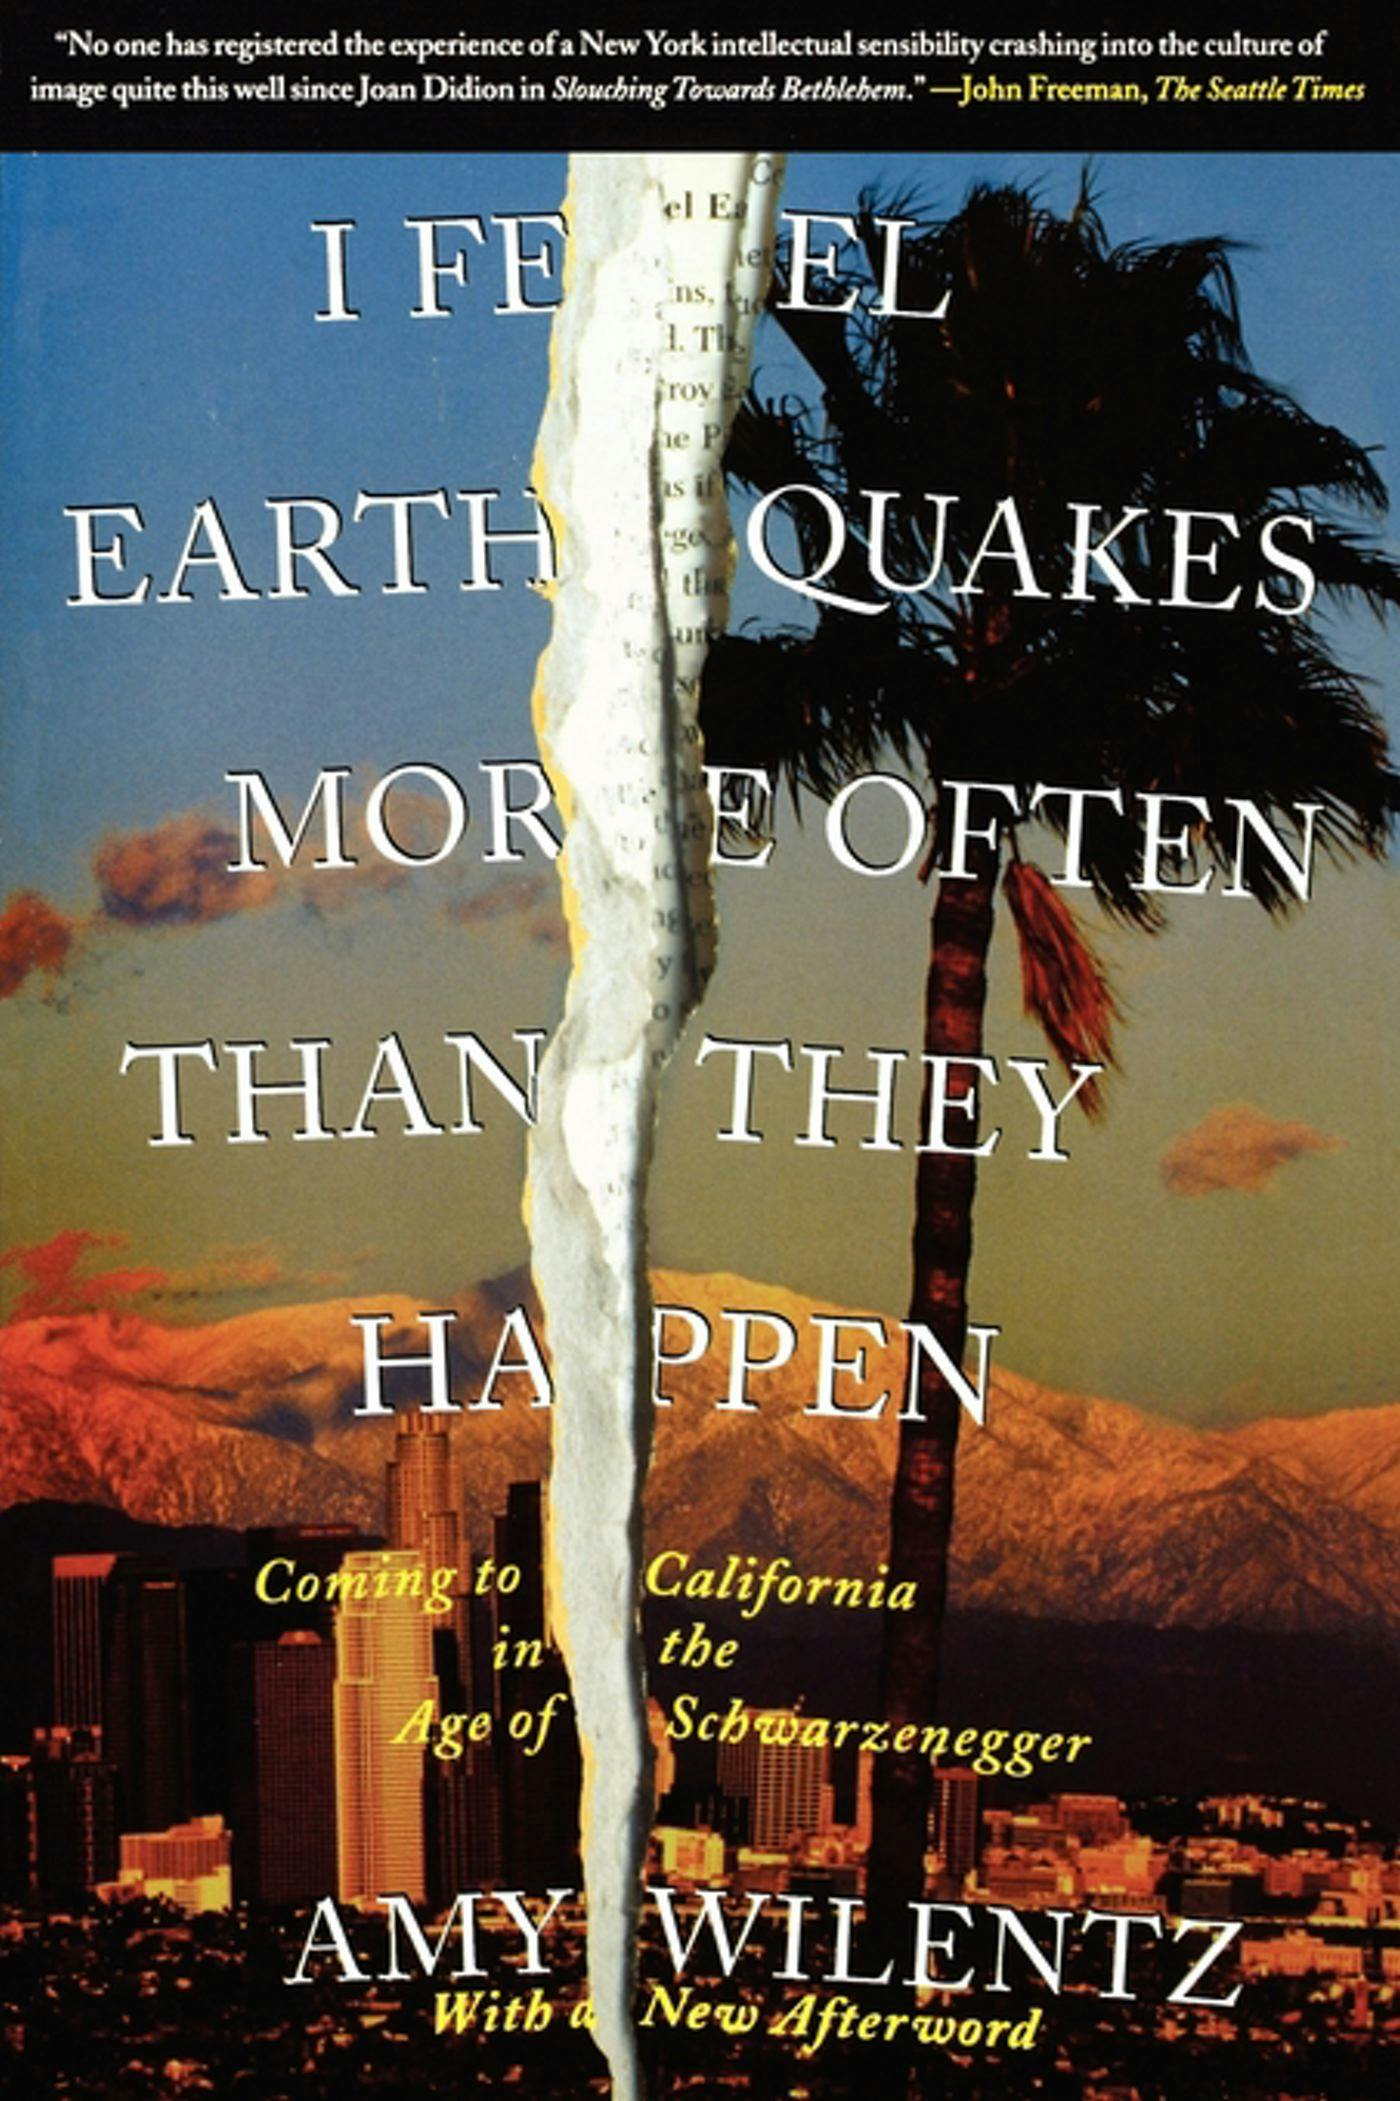 I Feel Earthquakes More Often Than They Happen: Coming to California in the Age of Schwarzenegger - Amy Wilentz